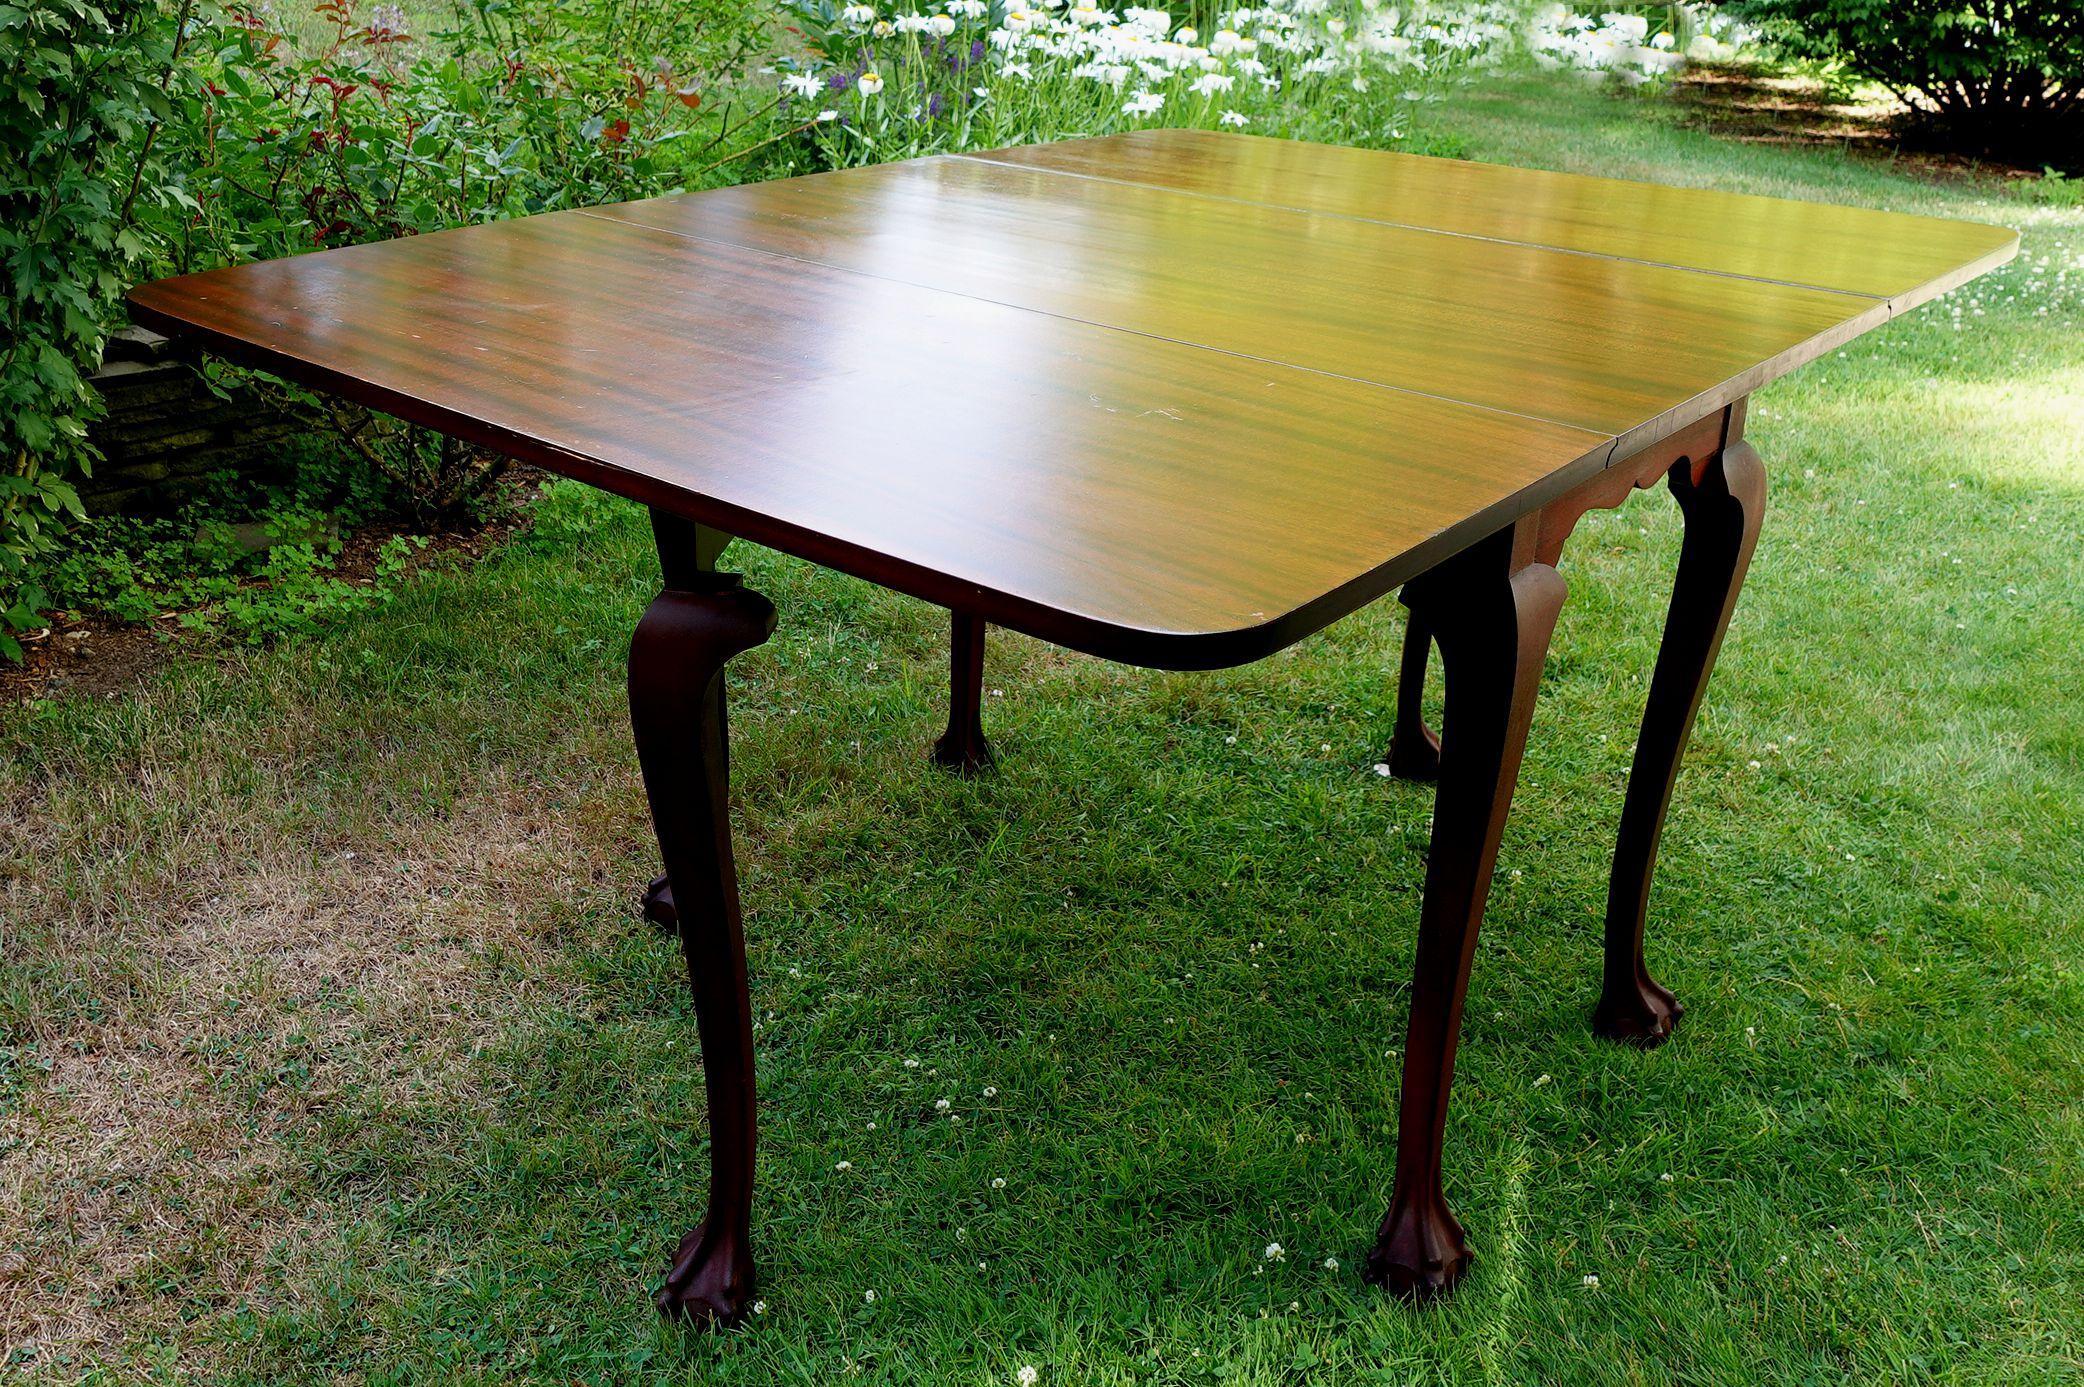 Six-legged dining tables are very desirable and relatively rare. They offer obviously greater stability than the four-legged form and cost a good deal more. There are 3 custom-made cover pads included.

The mahogany is beautifully figured. There